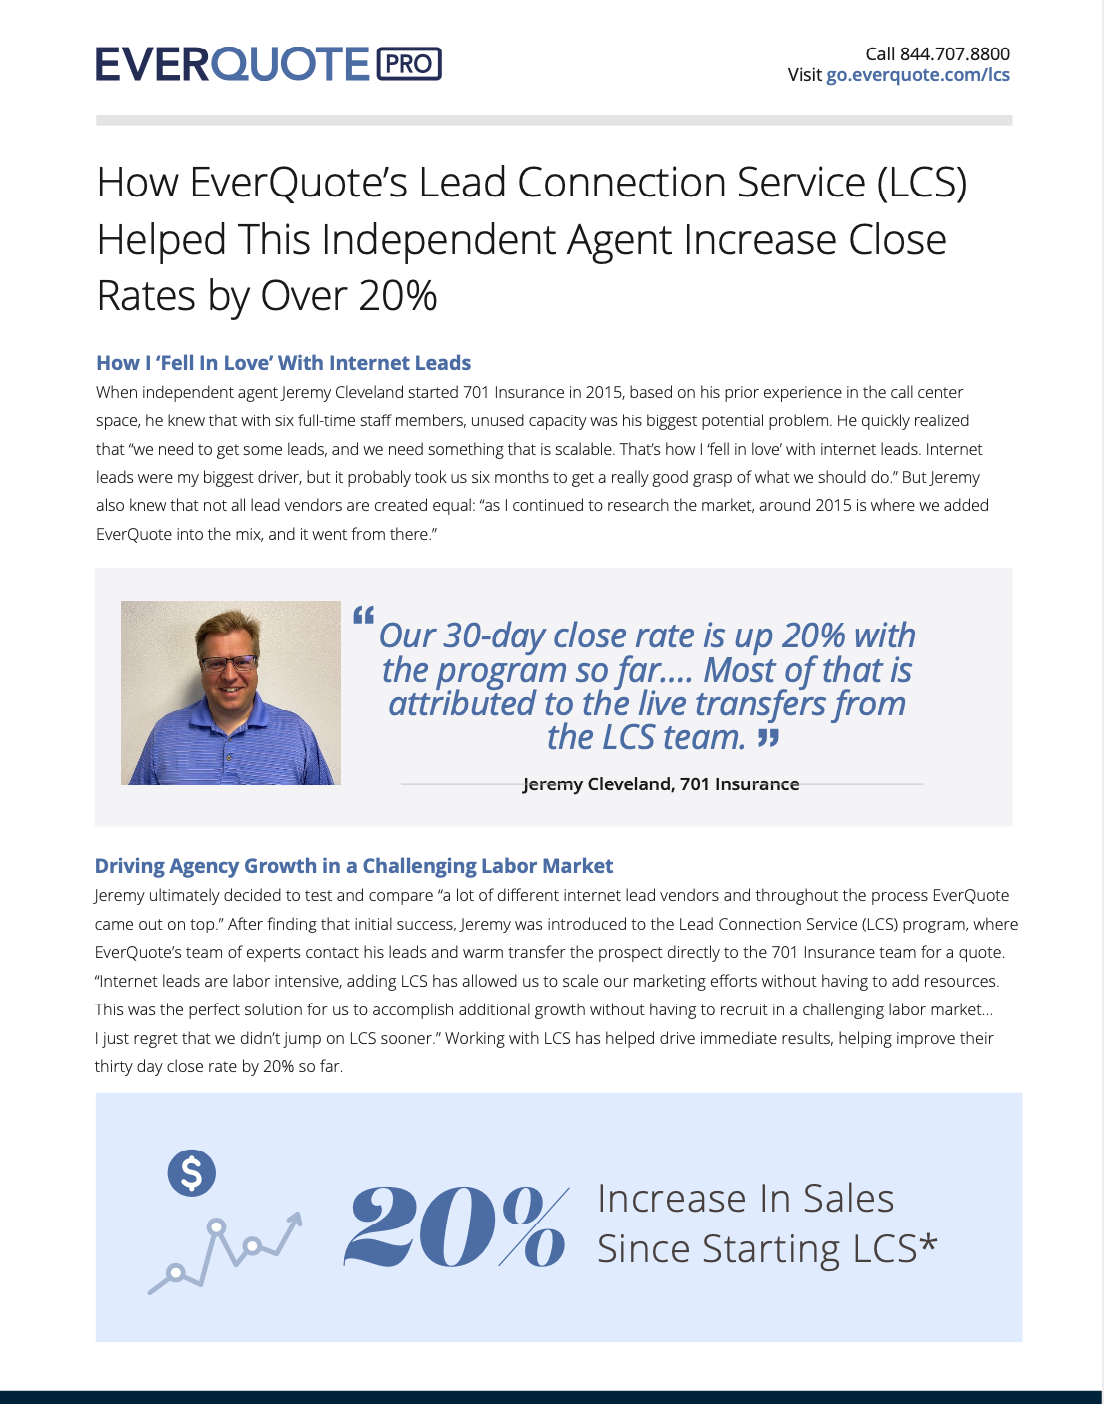 Discover How To Increase Close Rates By Over 20% With EverQuote’s Lead Connection Service (LCS)